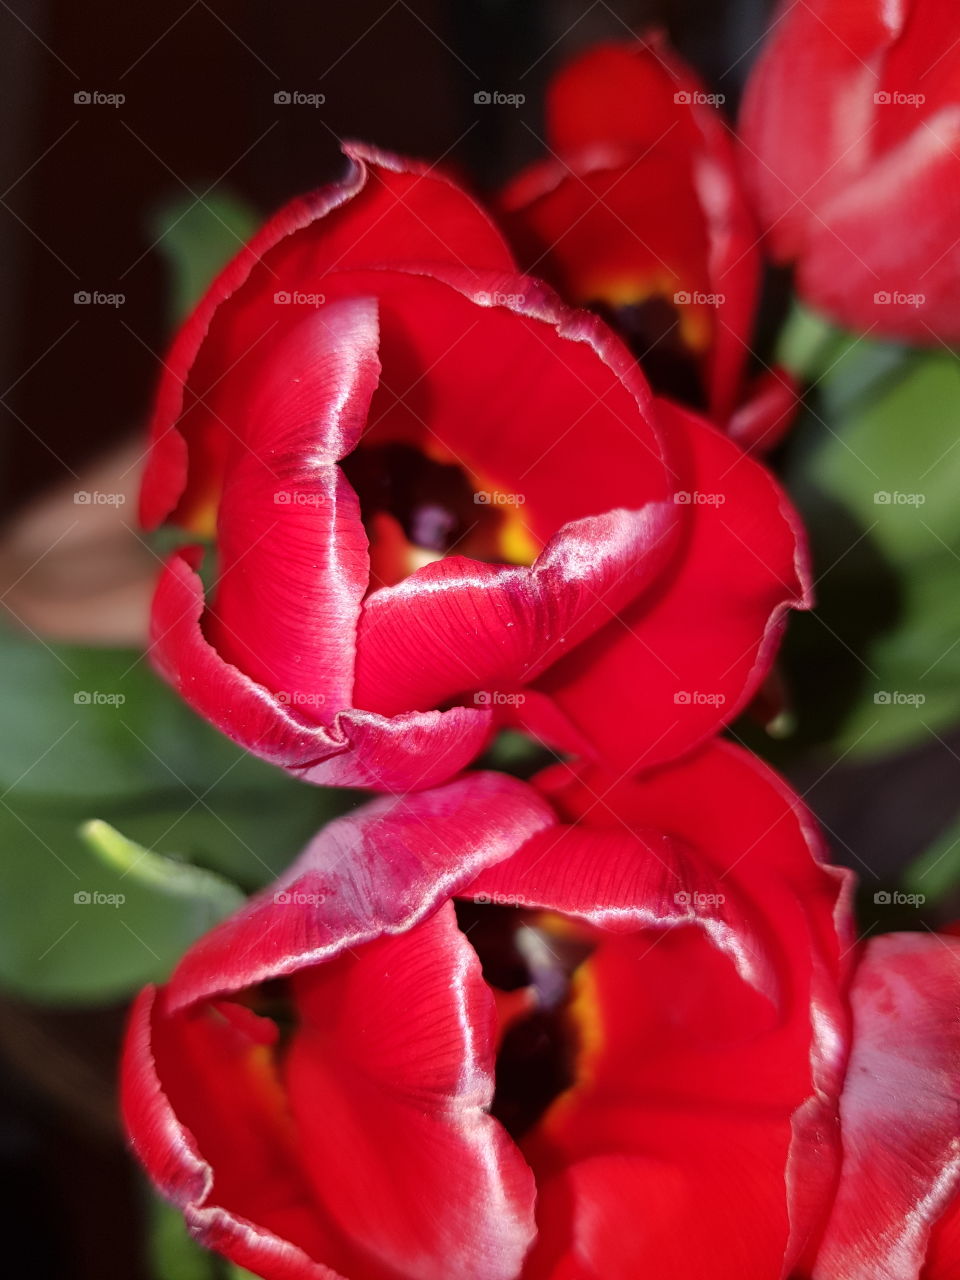 This fragrant red tulip gave colour to my whole house.